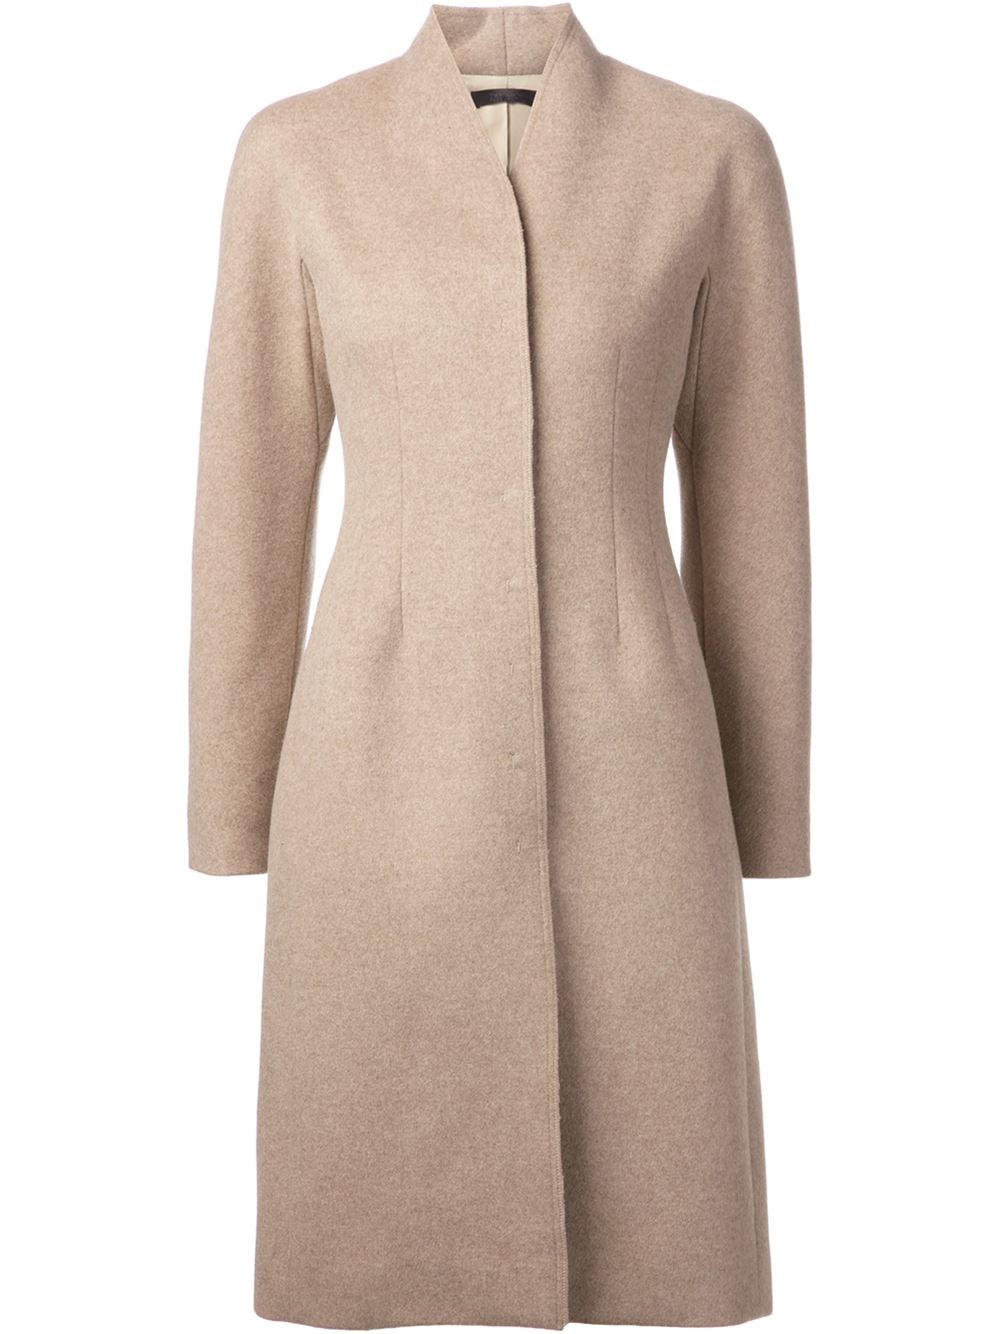 Lyst - The row V-Neck Wool Coat in Natural